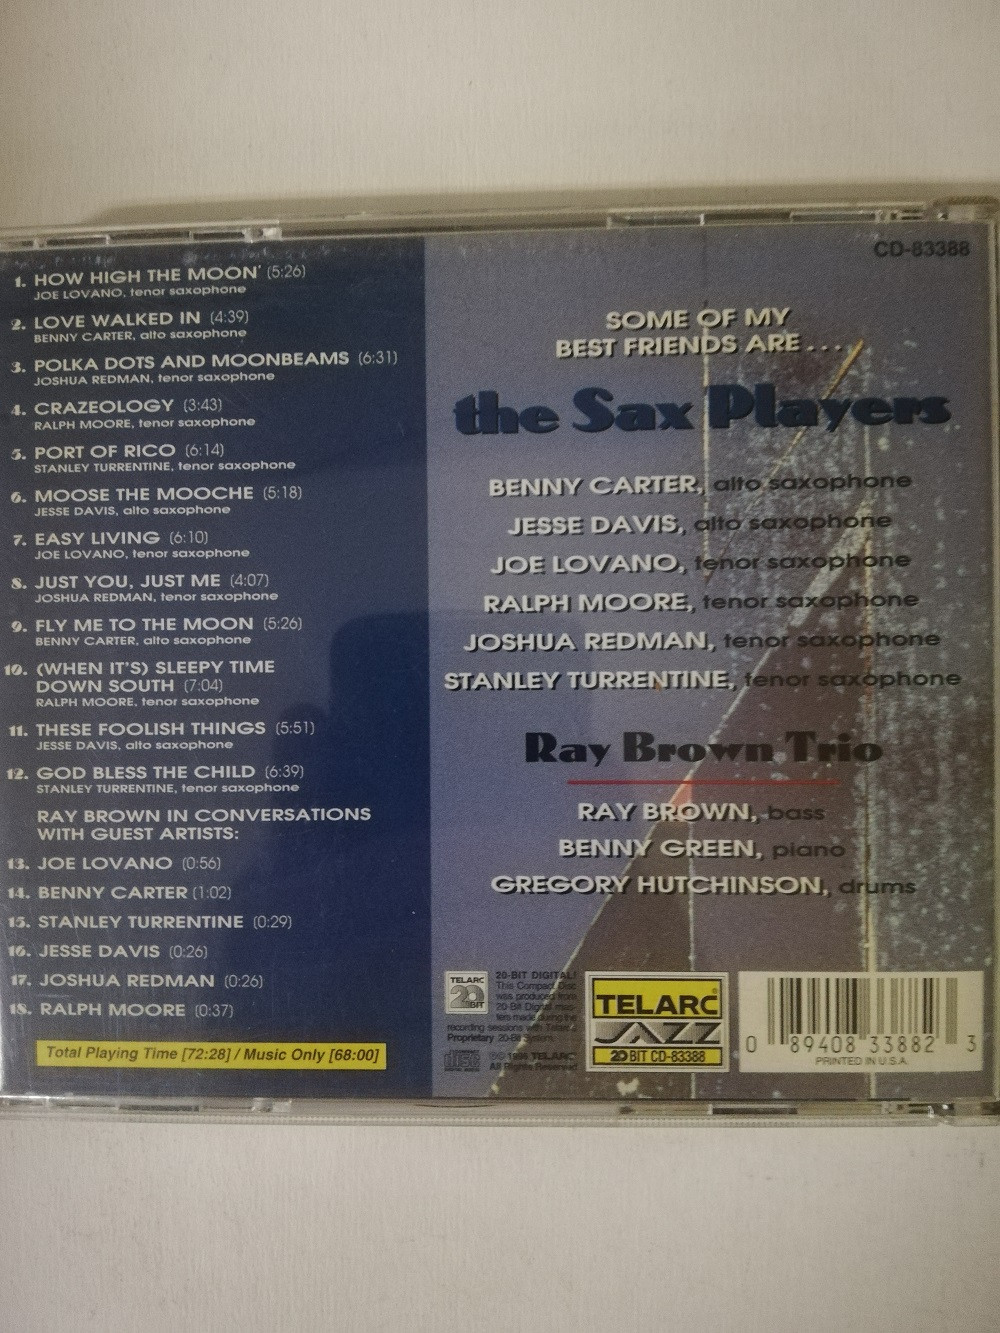 Imagen CD RAY BROWN TRIO - THE SAX PLAYERS  2